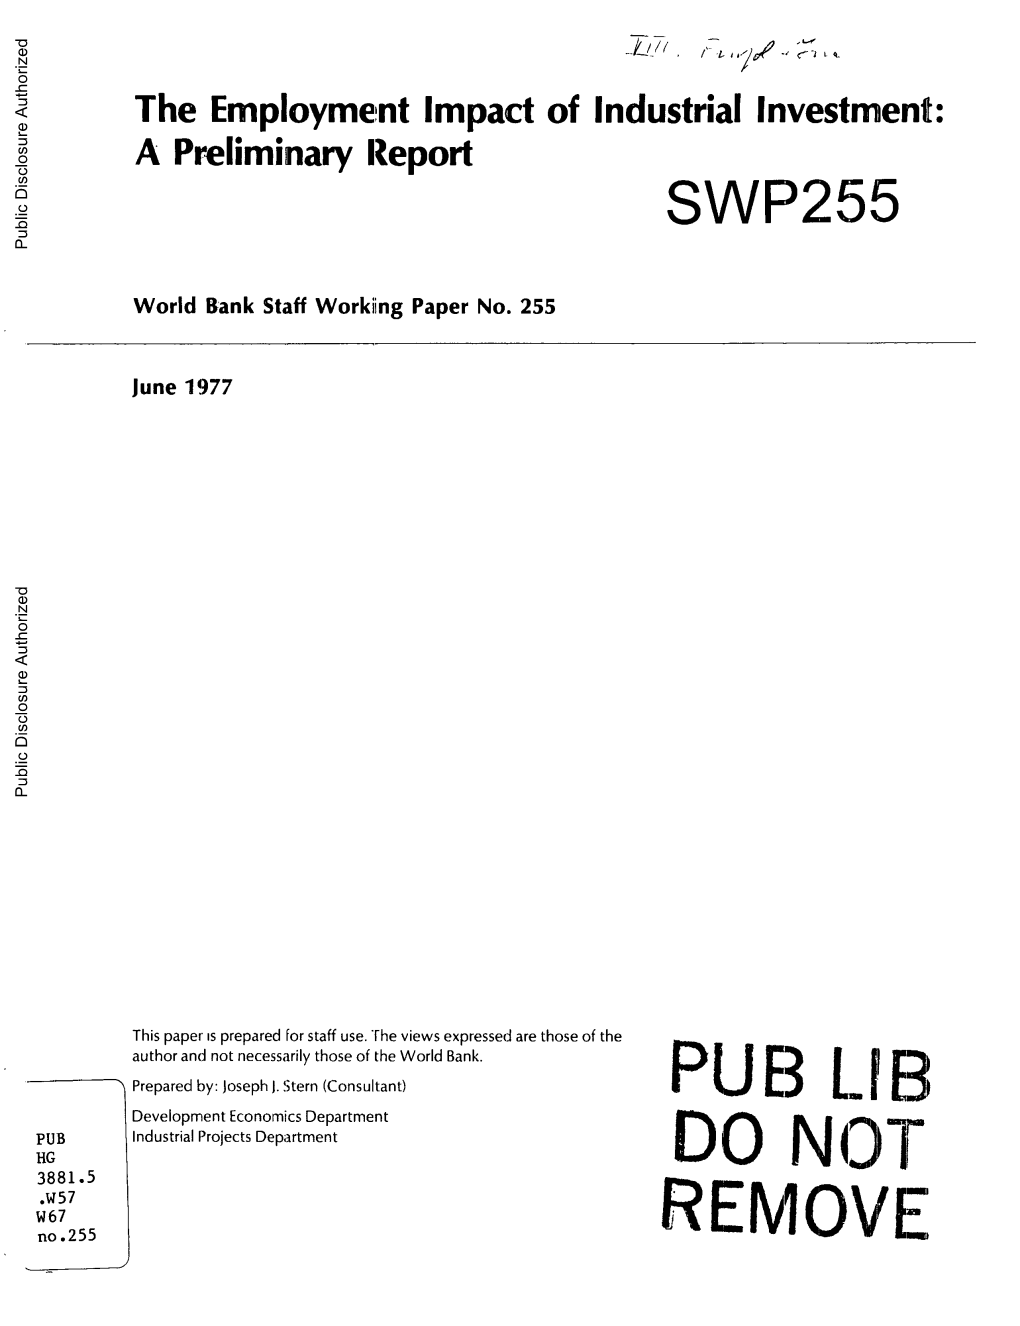 The Employment Impact of Industrial Investment: a Preliminary Lreport SWP255 Public Disclosure Authorized